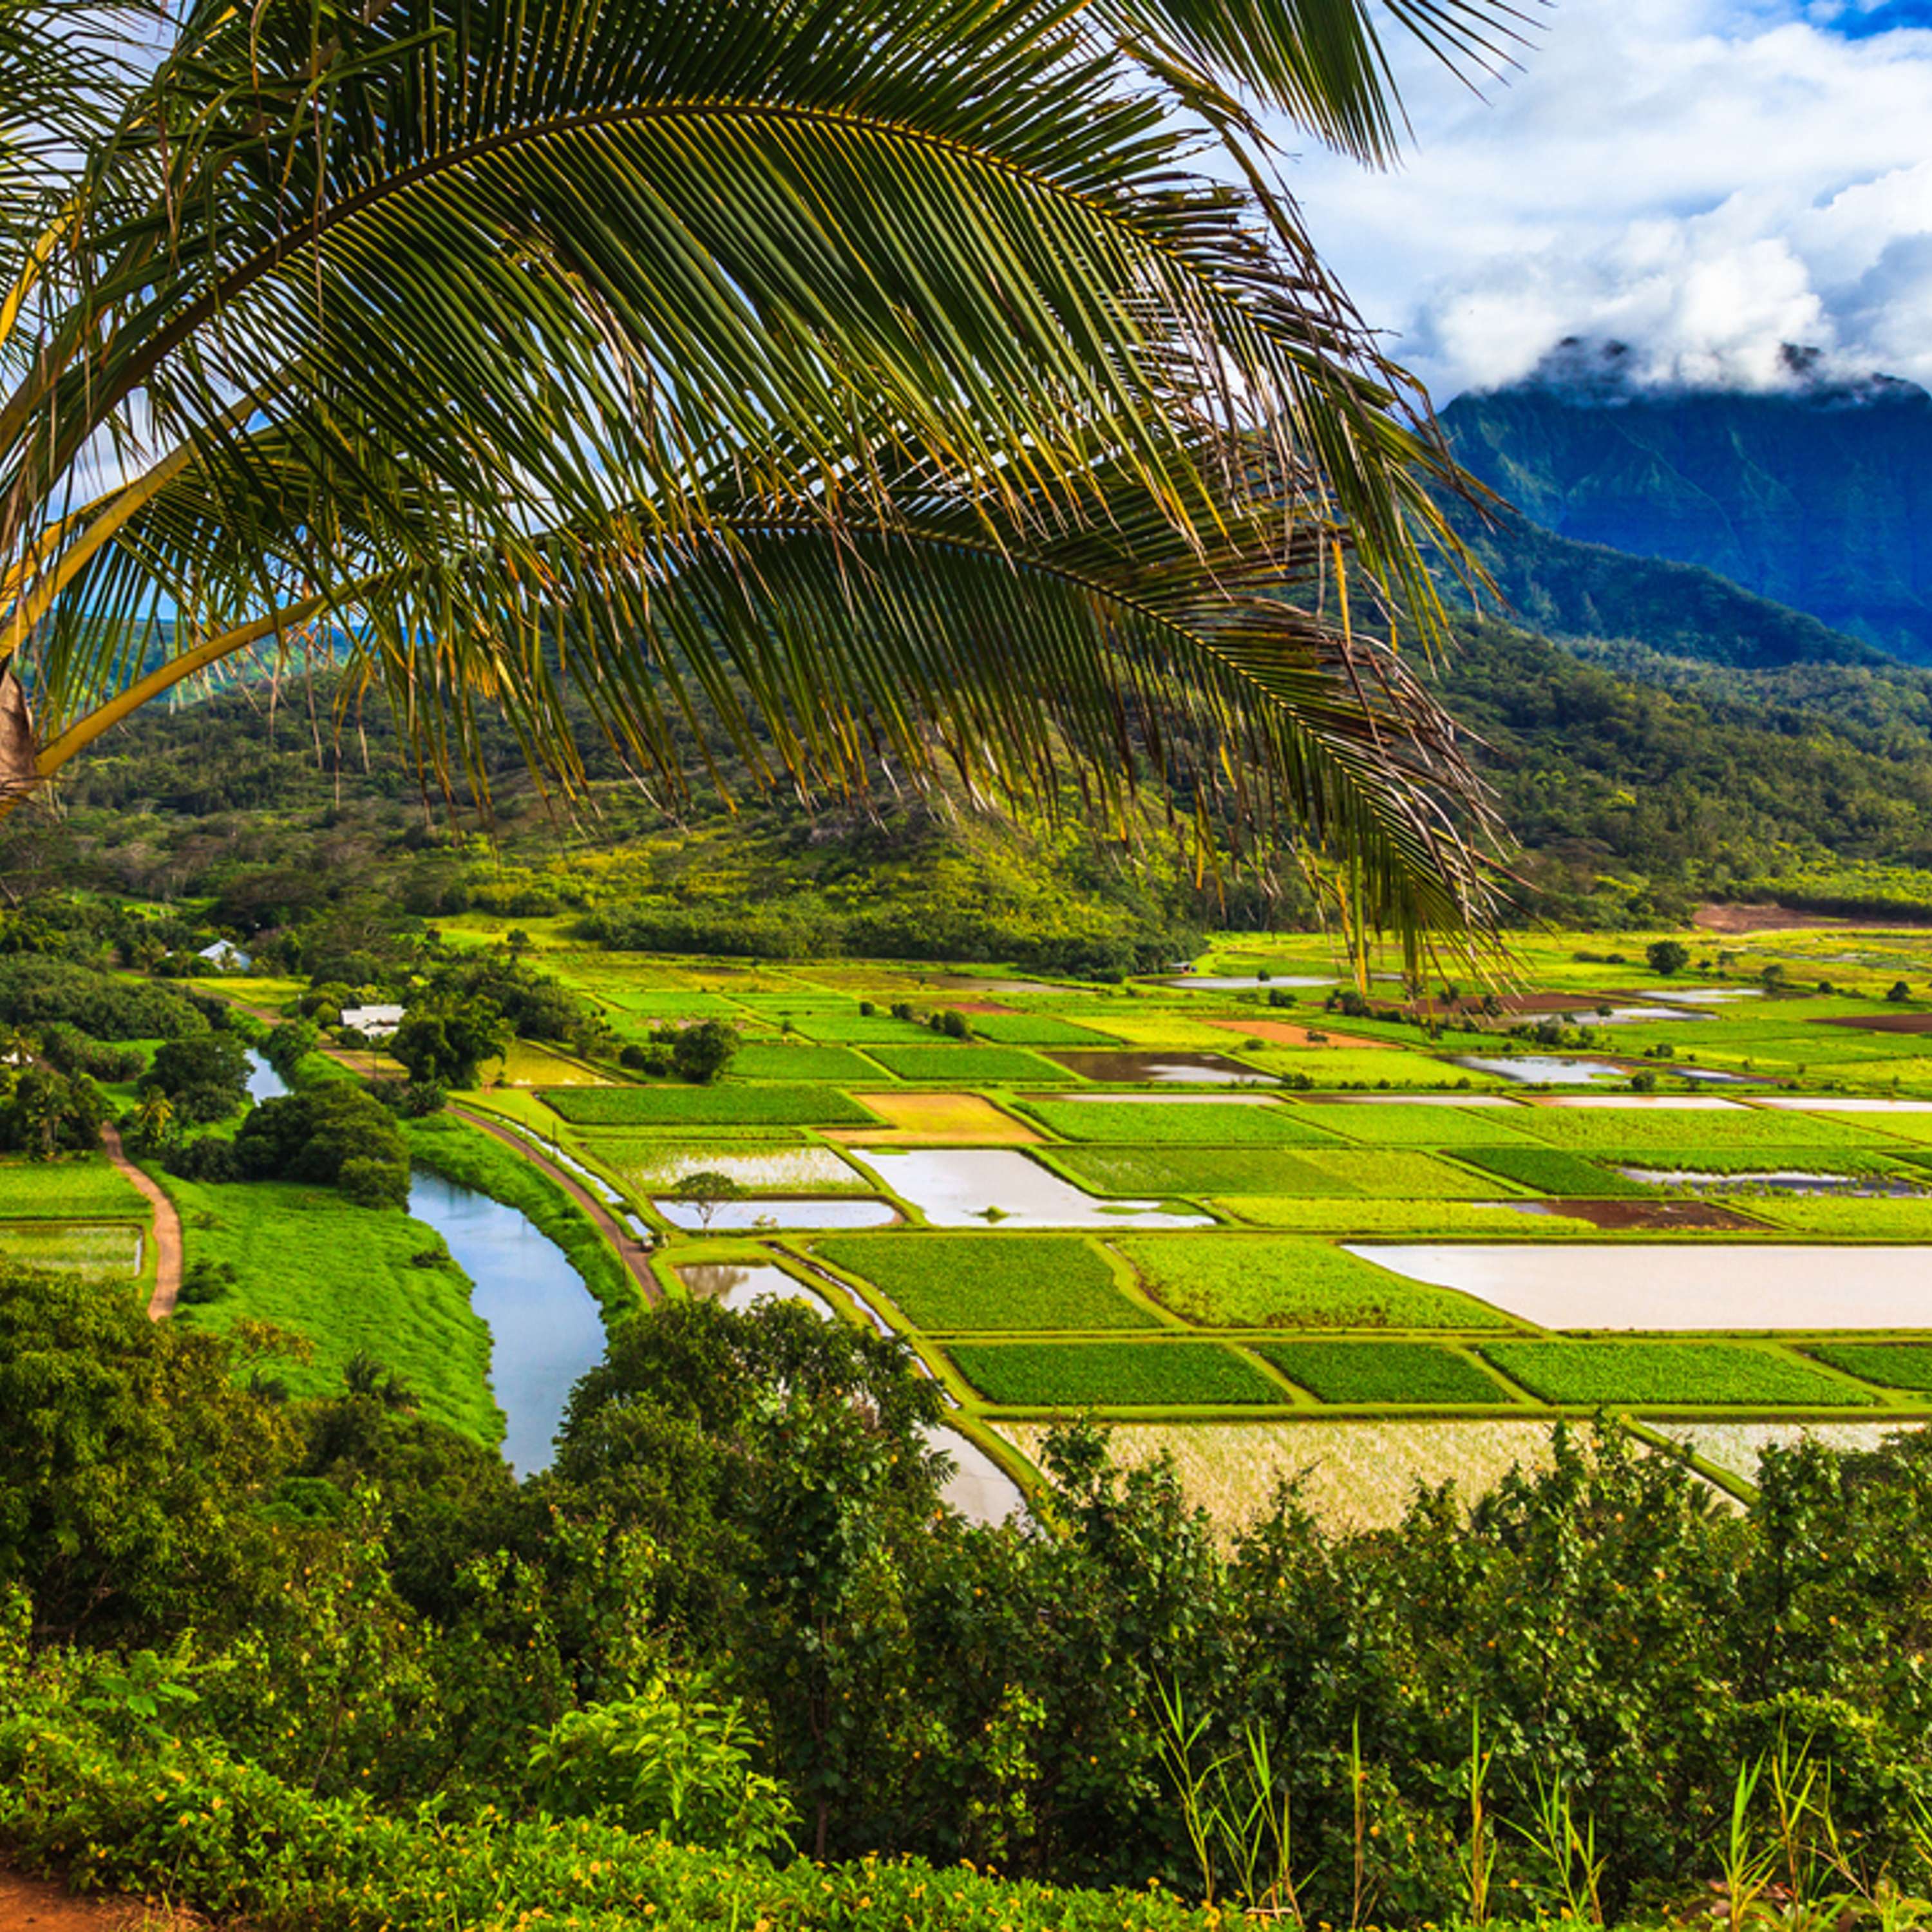 65 | Kauai for Families: Everything You Need to Know About Hawaii's 